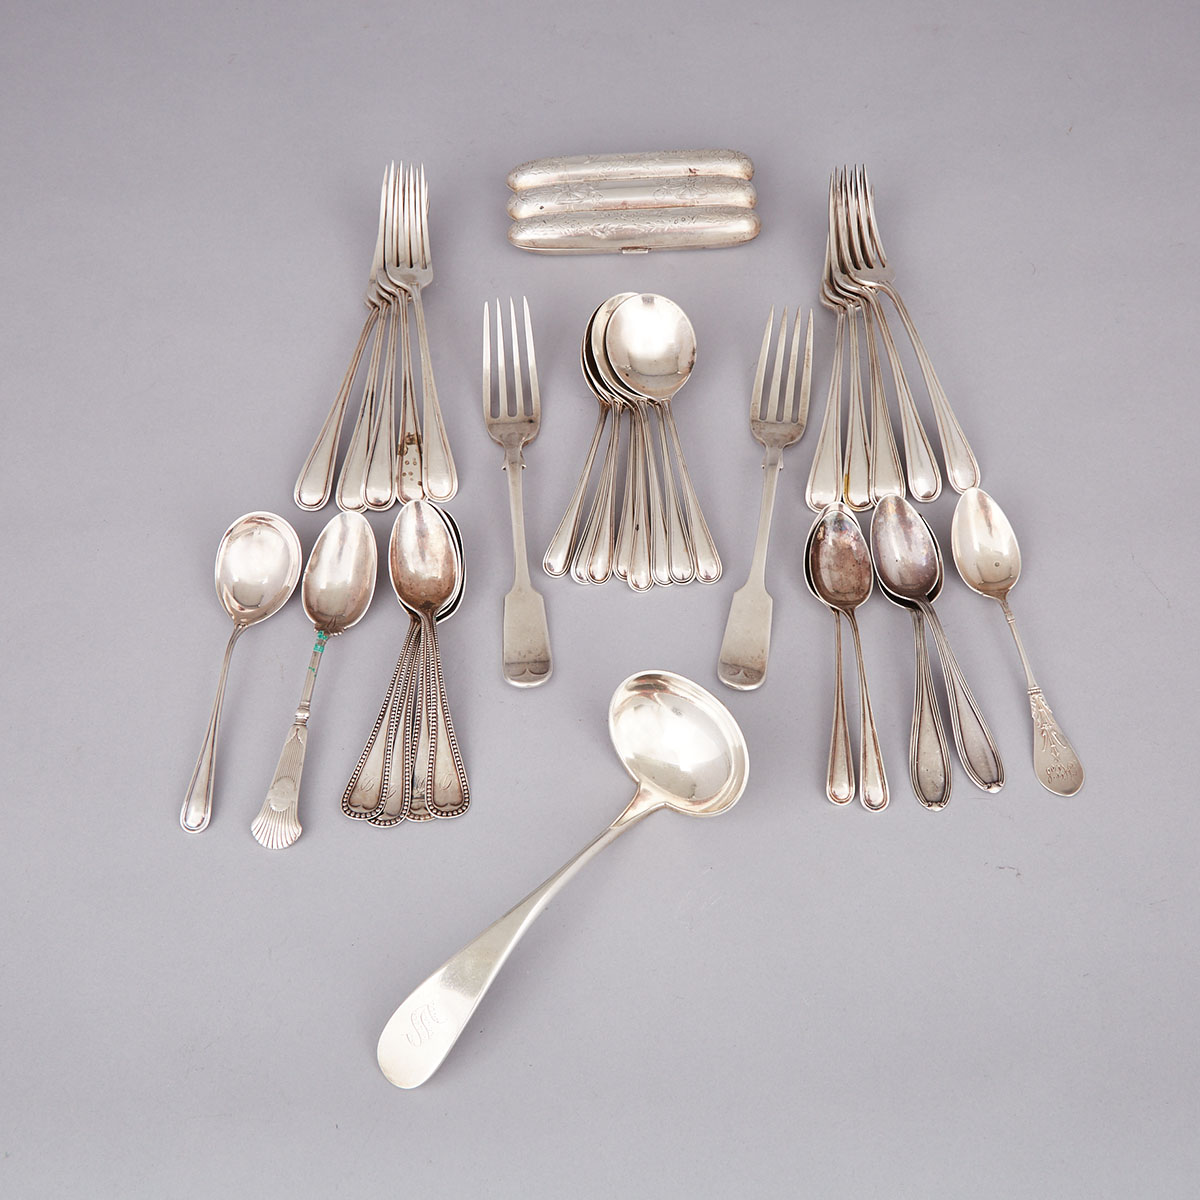 North American Silver Cigar Case and Thirty-Two Pieces of Flatware, late 19th/20th century